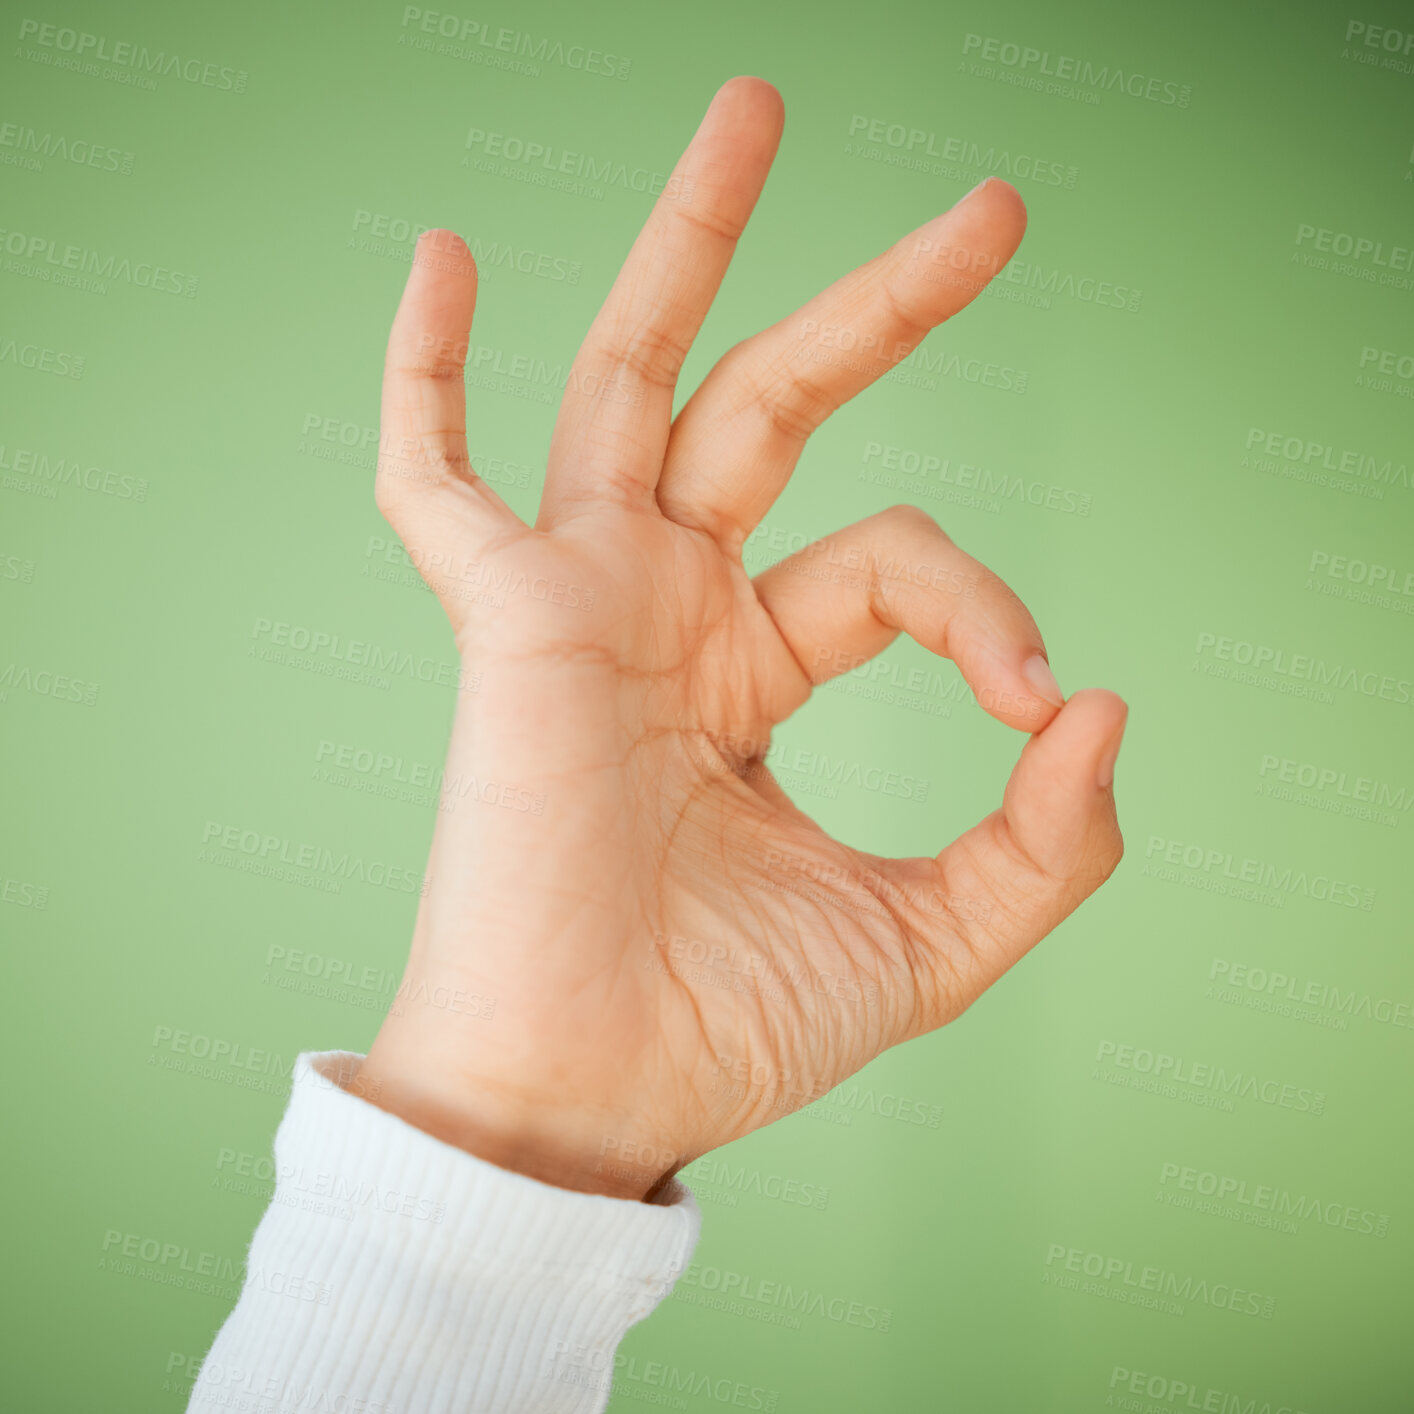 Buy stock photo Shot of an unrecognizable woman showing the OK sign against a green background